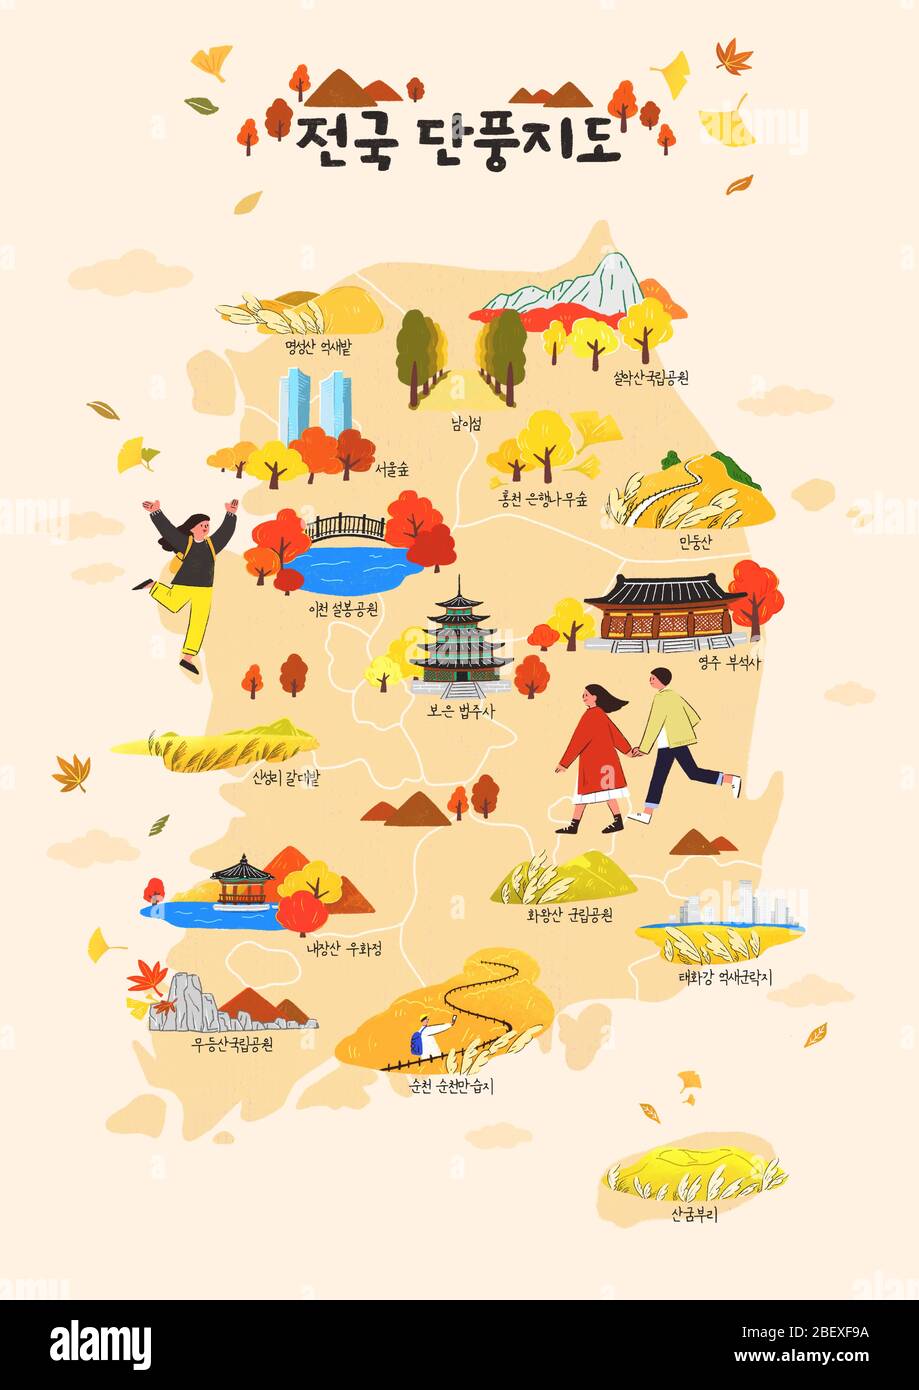 Tourist Map of South Korea concept, famous for various tourist attractions illustration 003 Stock Vector